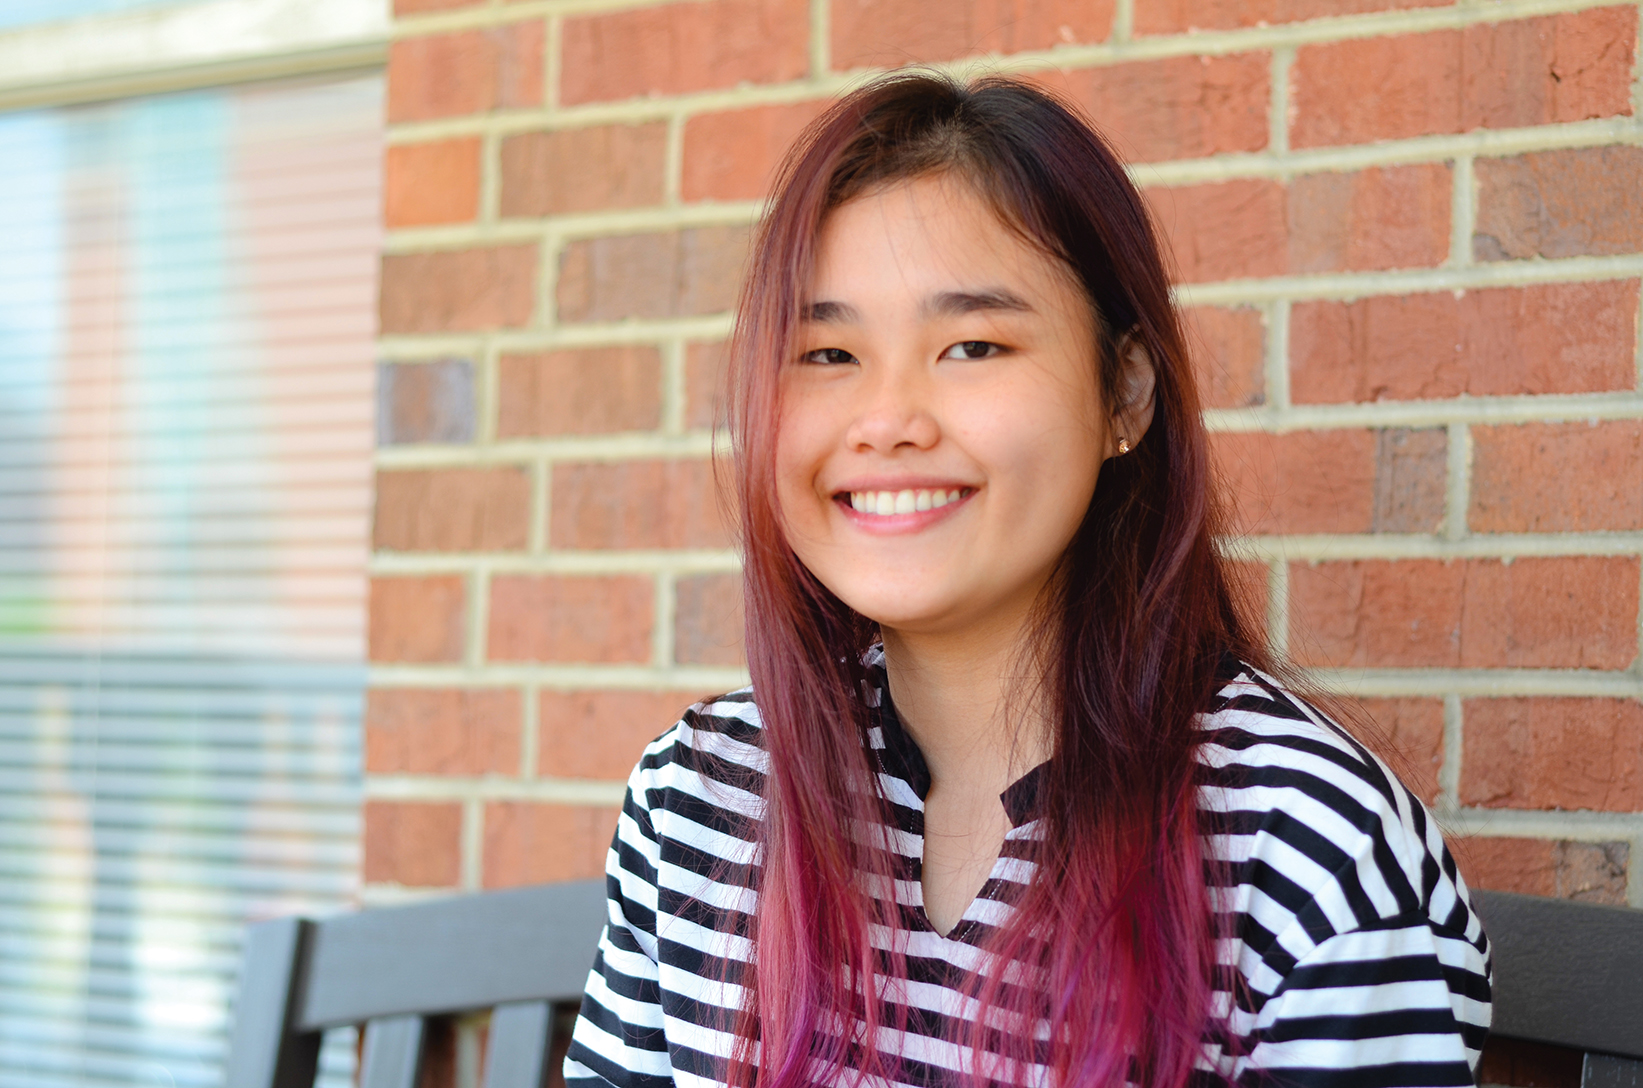 Vi Kim Ngo is one of the students who has come to UAB through the INTO partnership. Photo by Ian Keel